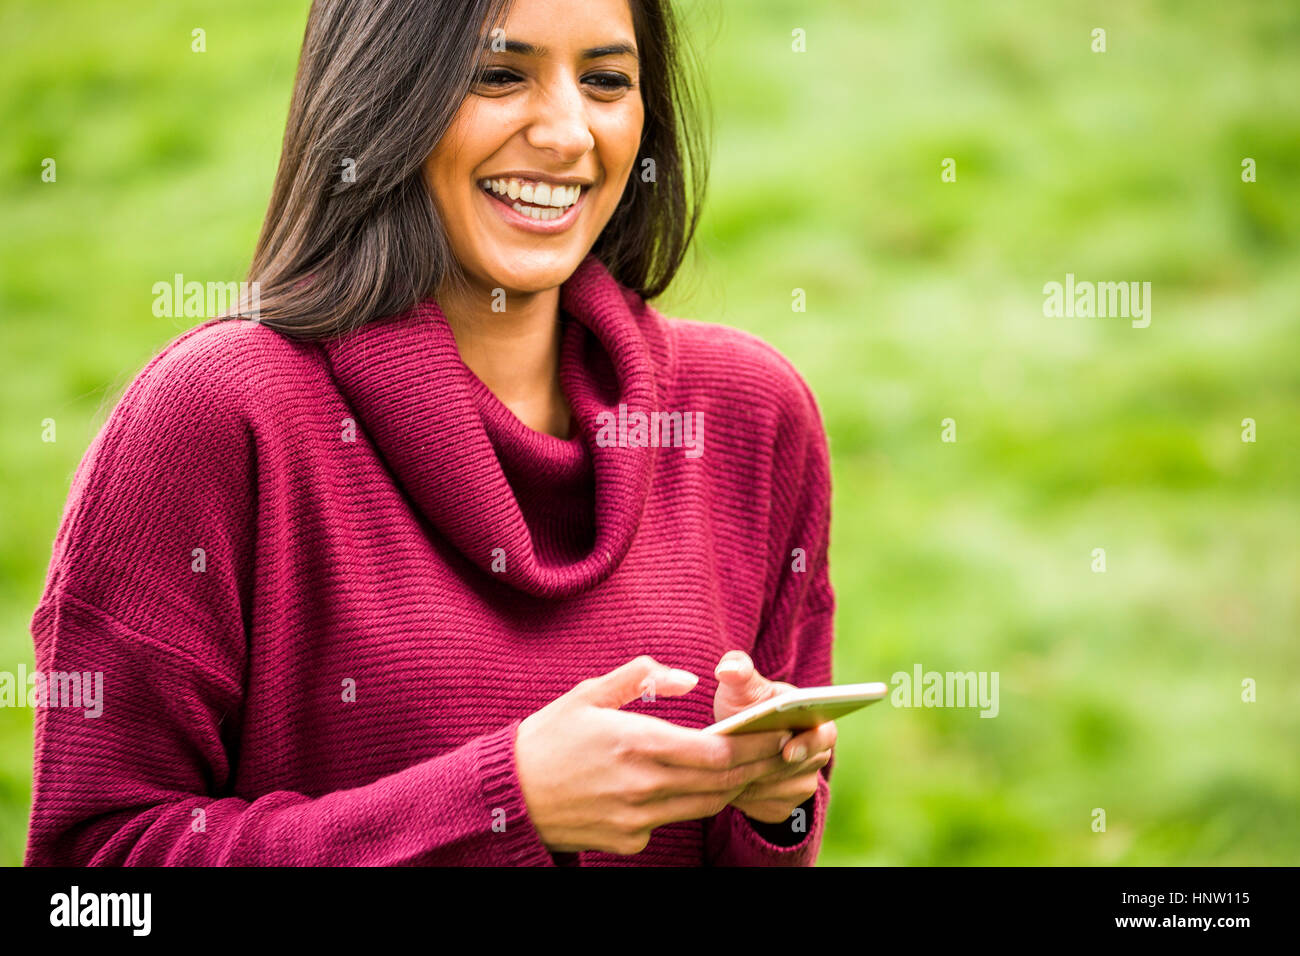 Laughing woman texting on cell phone Banque D'Images